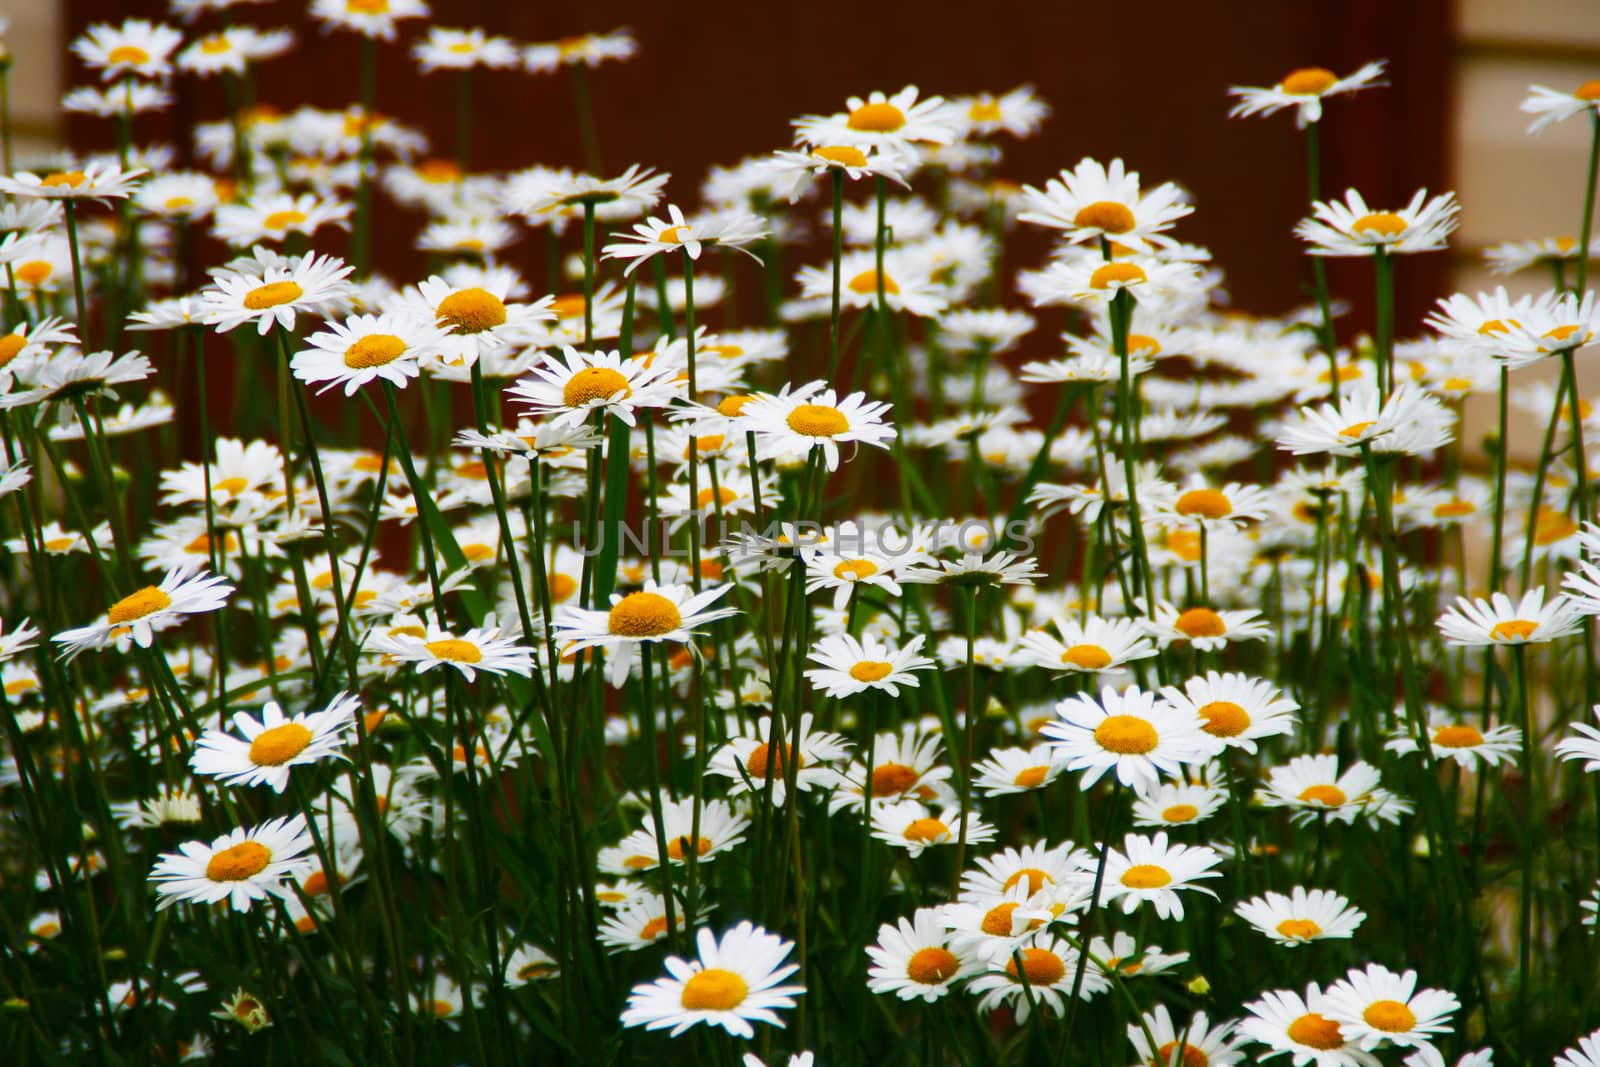 Background of flowering daisies with white petals. by Igor2006